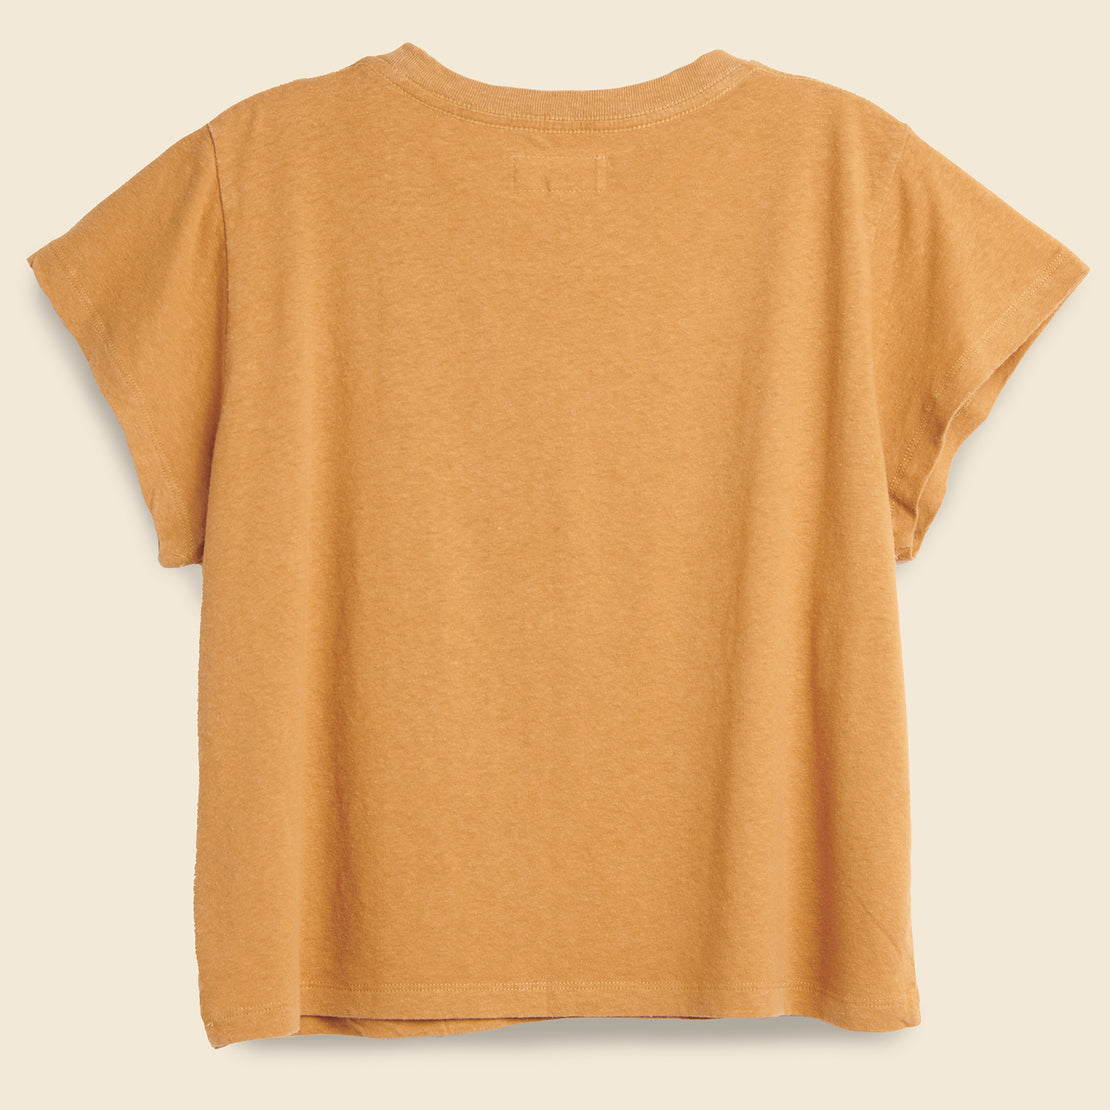 Q Tee - Tan Earth - Mollusk - STAG Provisions - W - Tops - S/S Tee